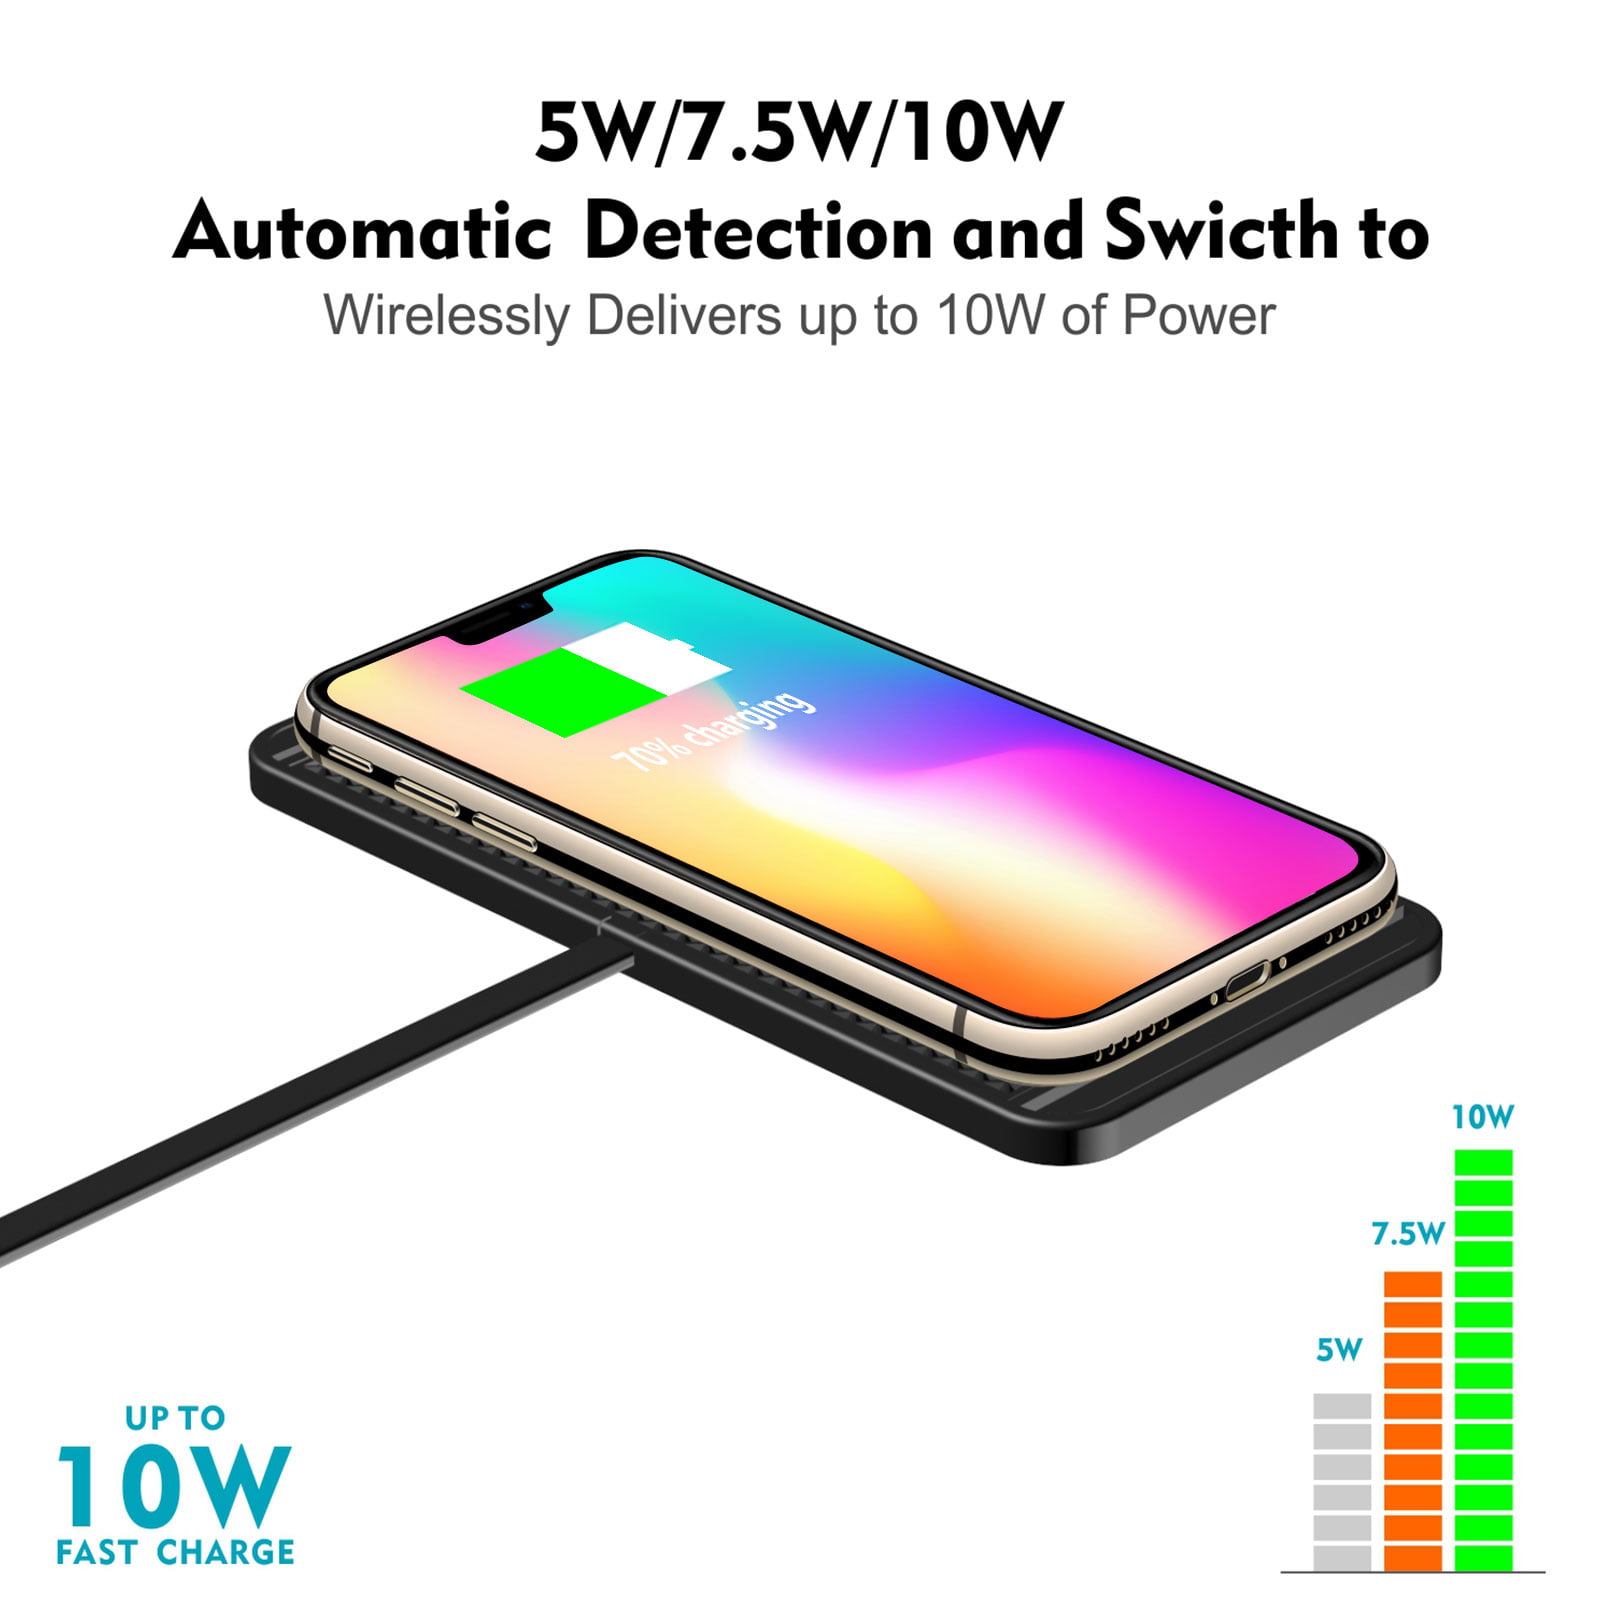 BETTERSHOP™ QI-Certified Wireless Car Charger Quick Charge 10W und Telefon-Support, kompatibel mit iPhone XS/Xr/X / 8/8 Plus, Samsung Note 5/8, Galaxy S9 / S8 / S7 / S6 Edge + 